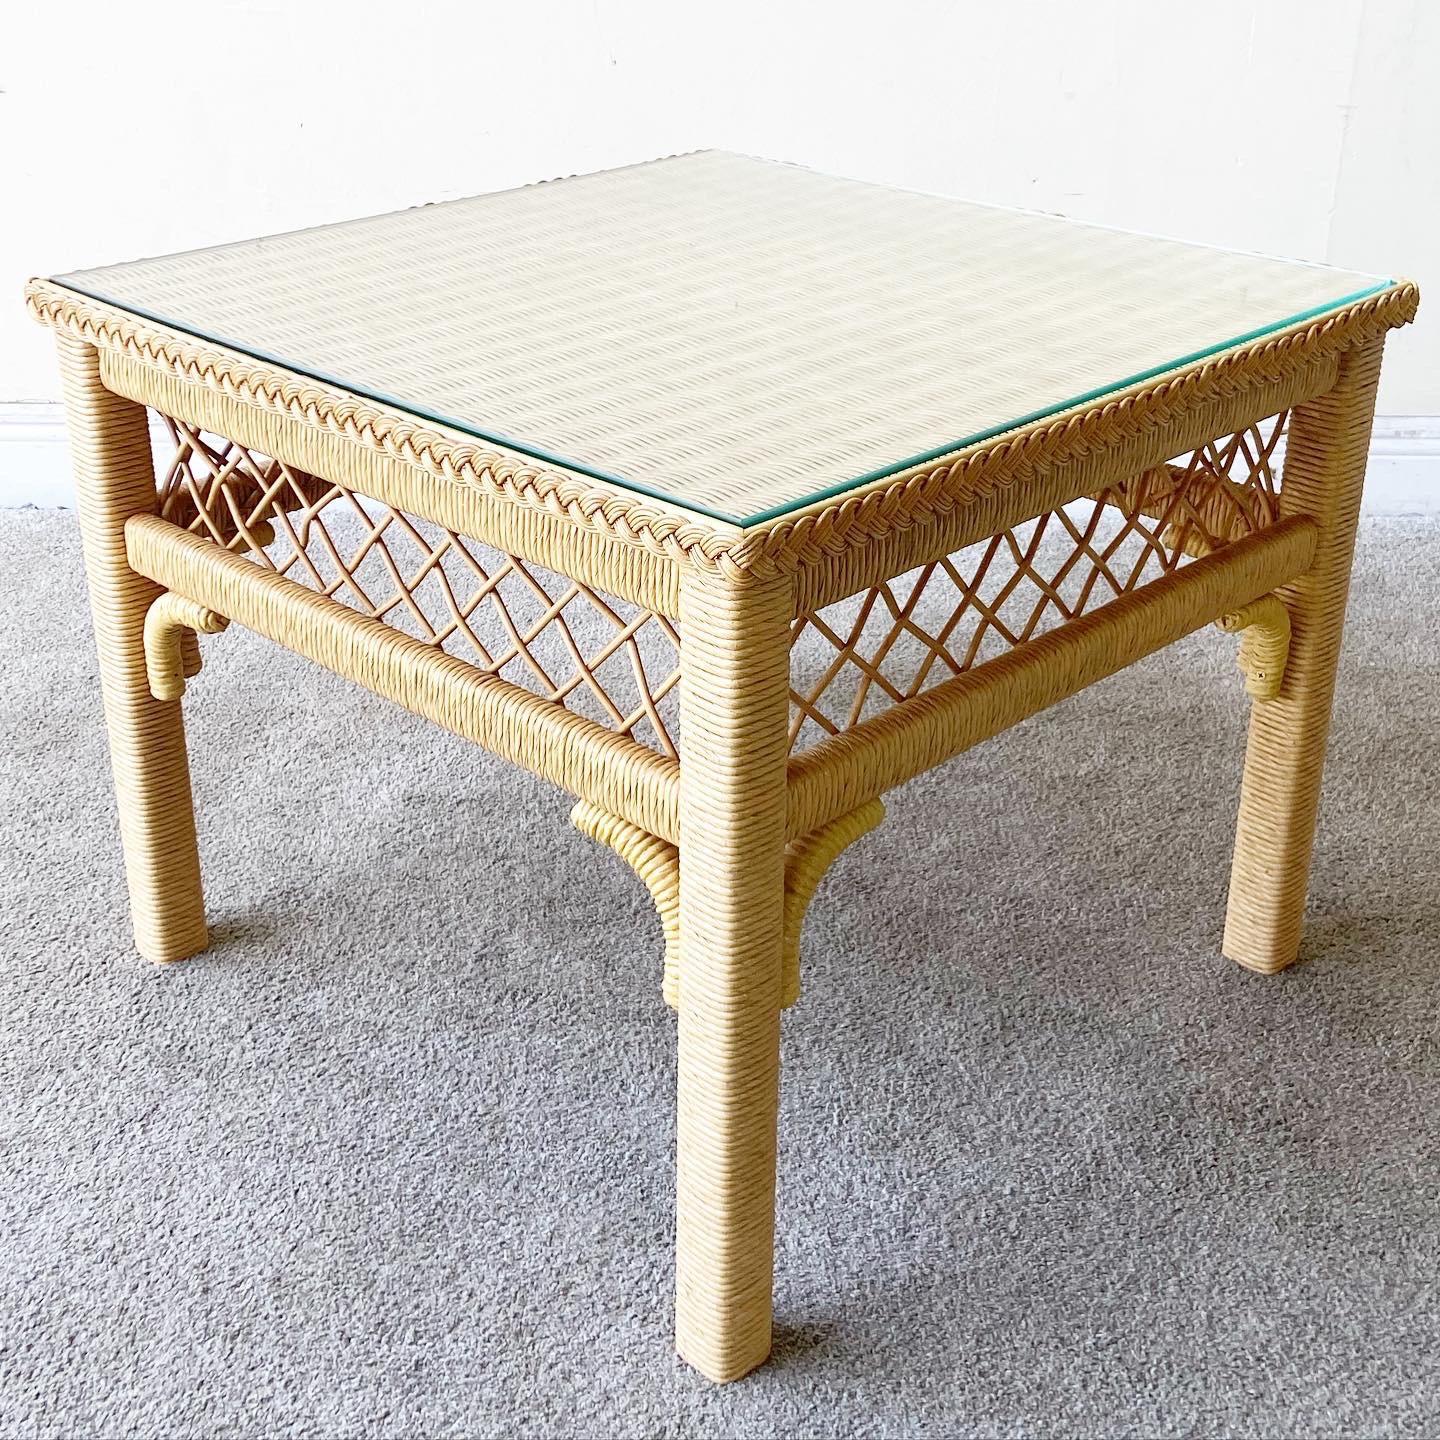 Exceptional bohemian side table by Henry link. Table features woven wicker and rattan frame with a glass top. There are no marks which read Henry Link on this table.